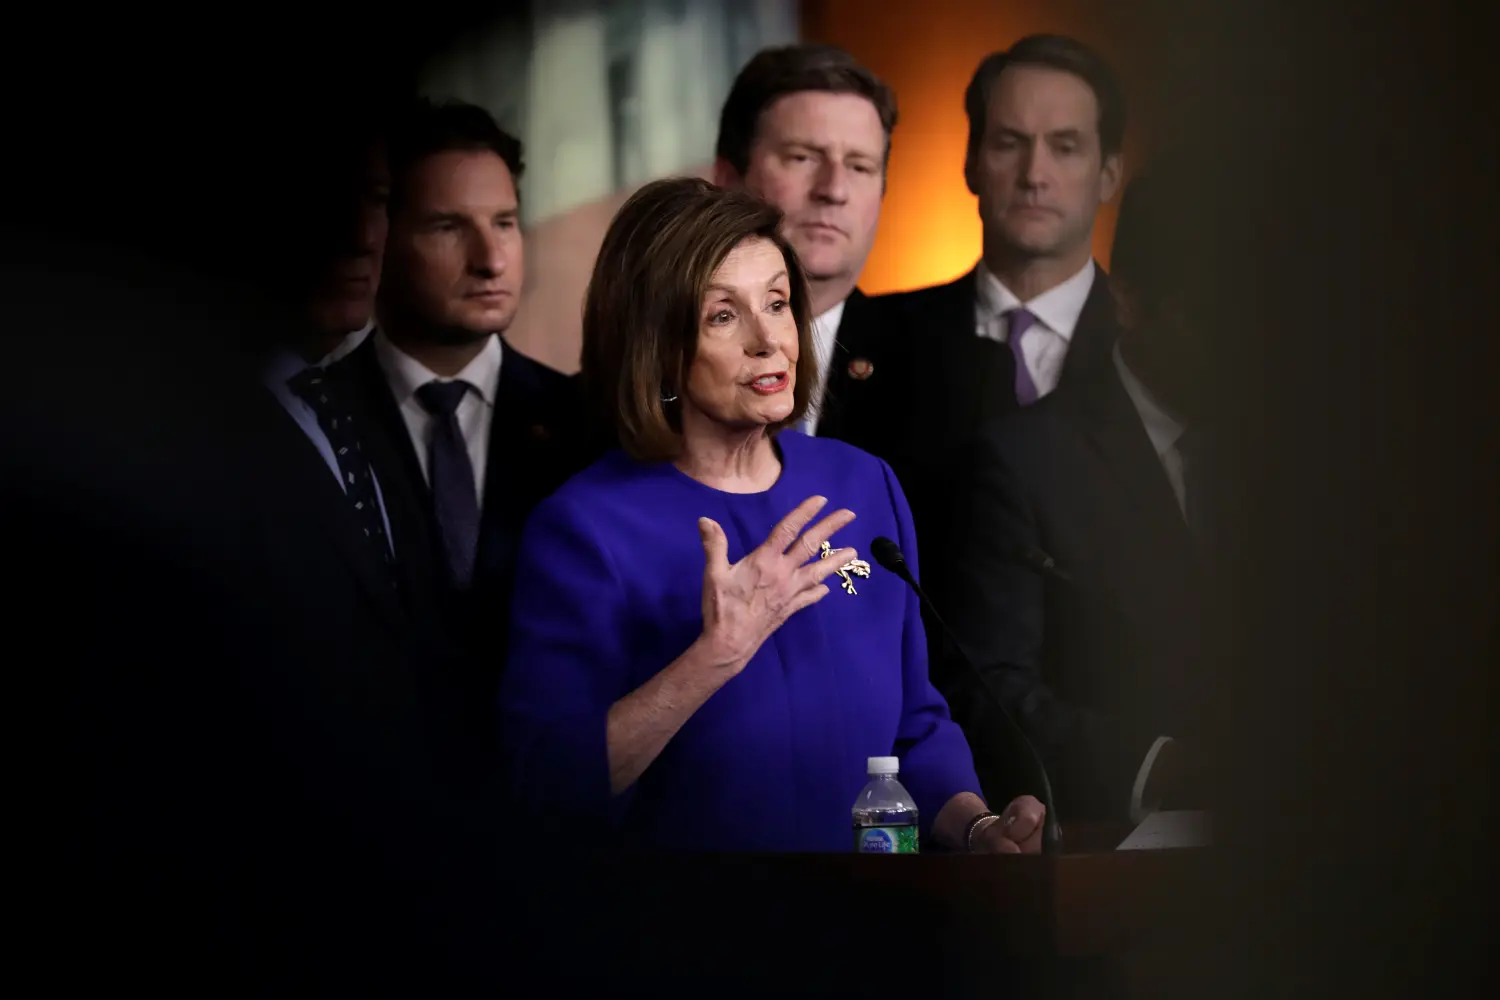 U.S. House Speaker Nancy Pelosi (D-CA) speaks during a news conference on the USMCA trade agreement on Capitol Hill in Washington, U.S., December 10, 2019. REUTERS/Yuri Gripas - RC2FSD940VM4